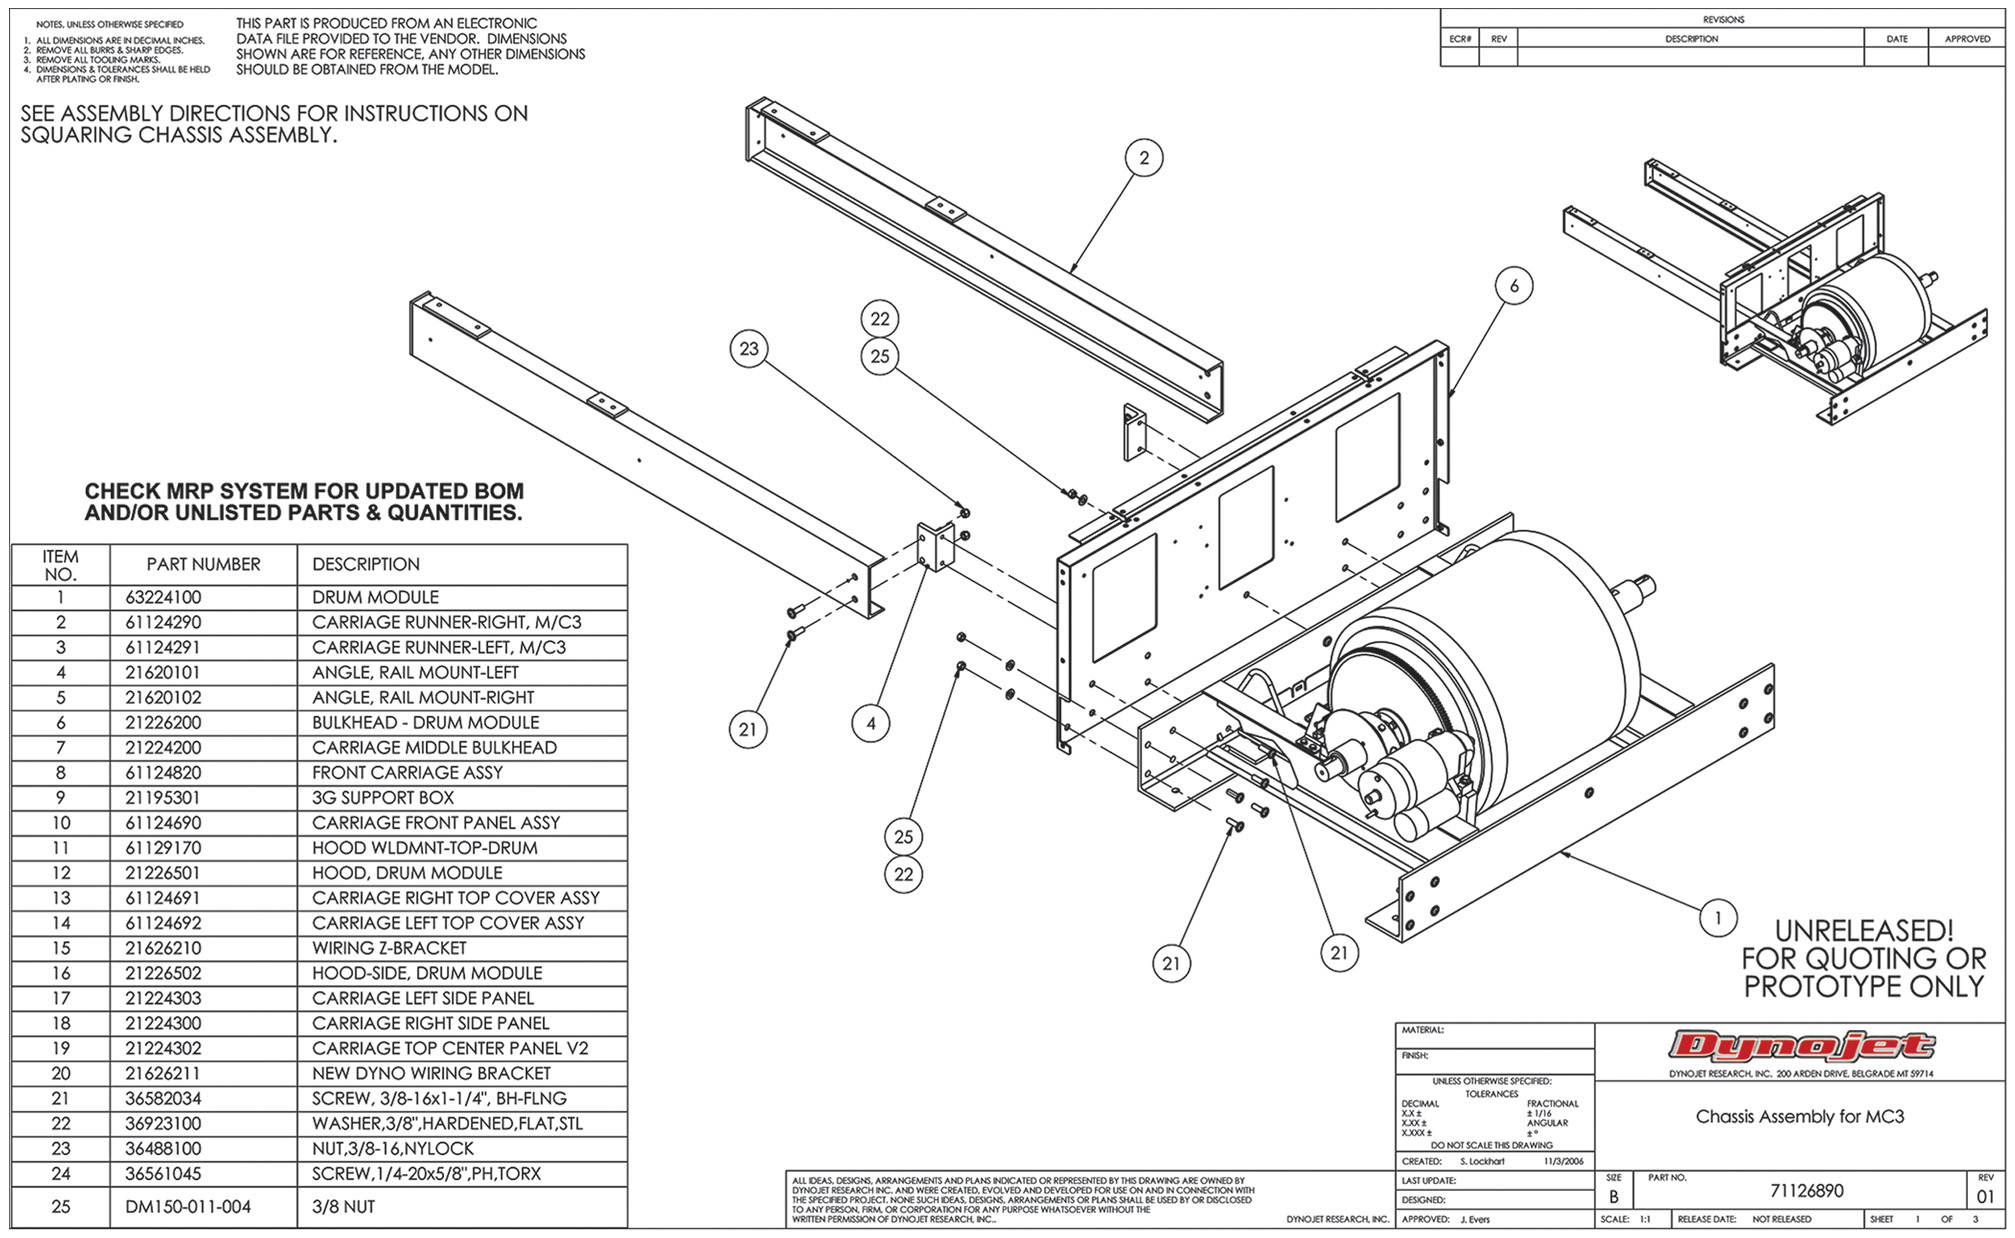 Figure depicts the assembly directions for the instructions on squaring chassis assembly.